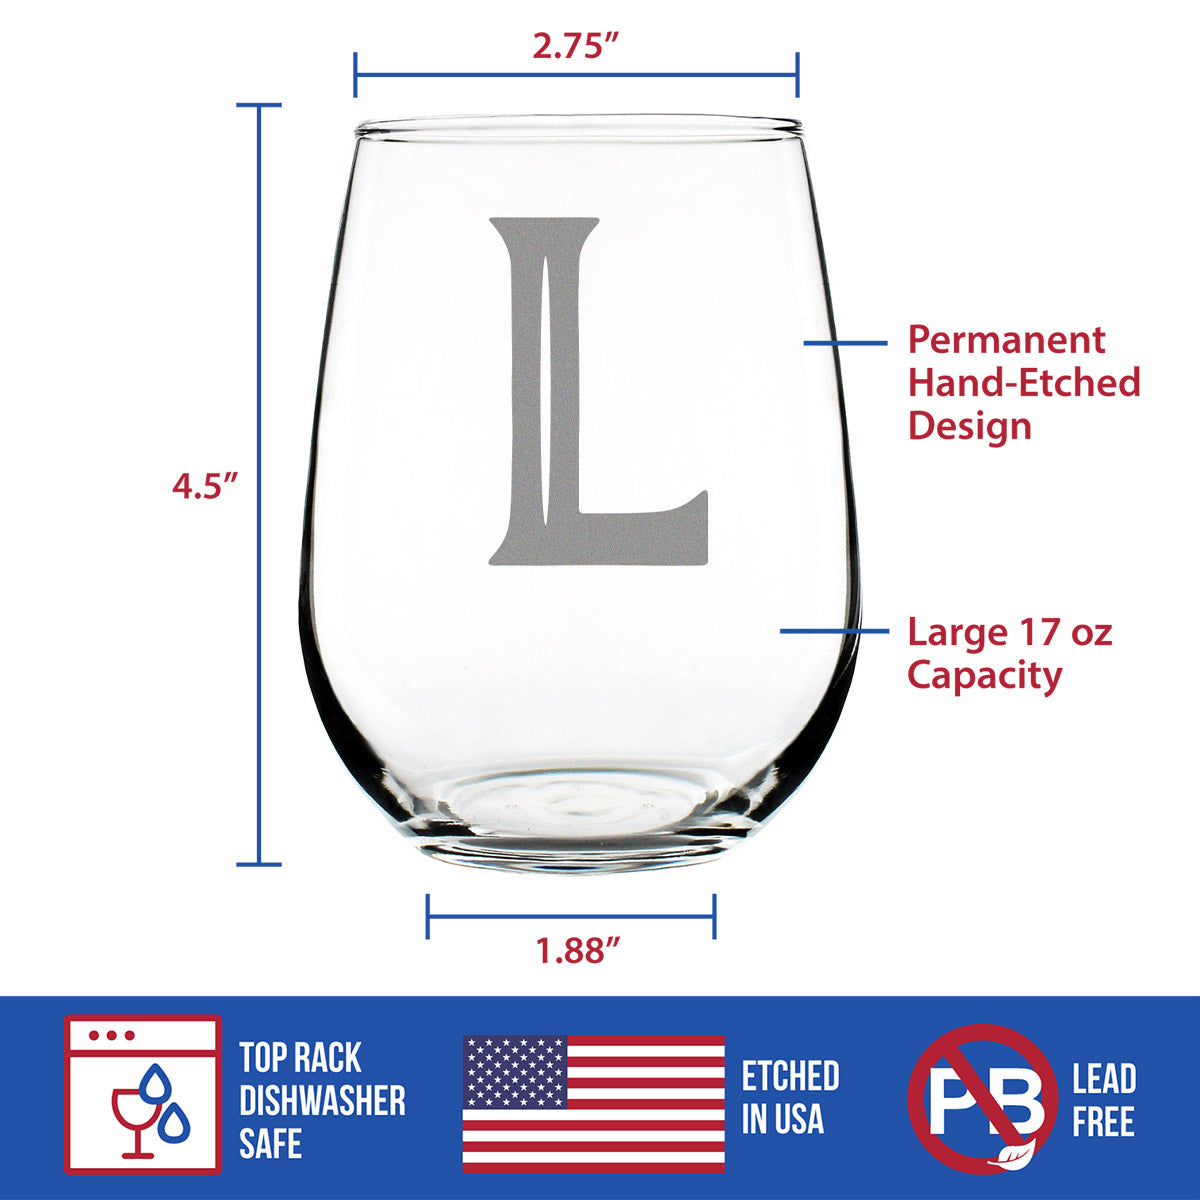 Monogram Bold Letter L - Stemless Wine Glass - Personalized Gifts for Women and Men - Large Engraved Glasses